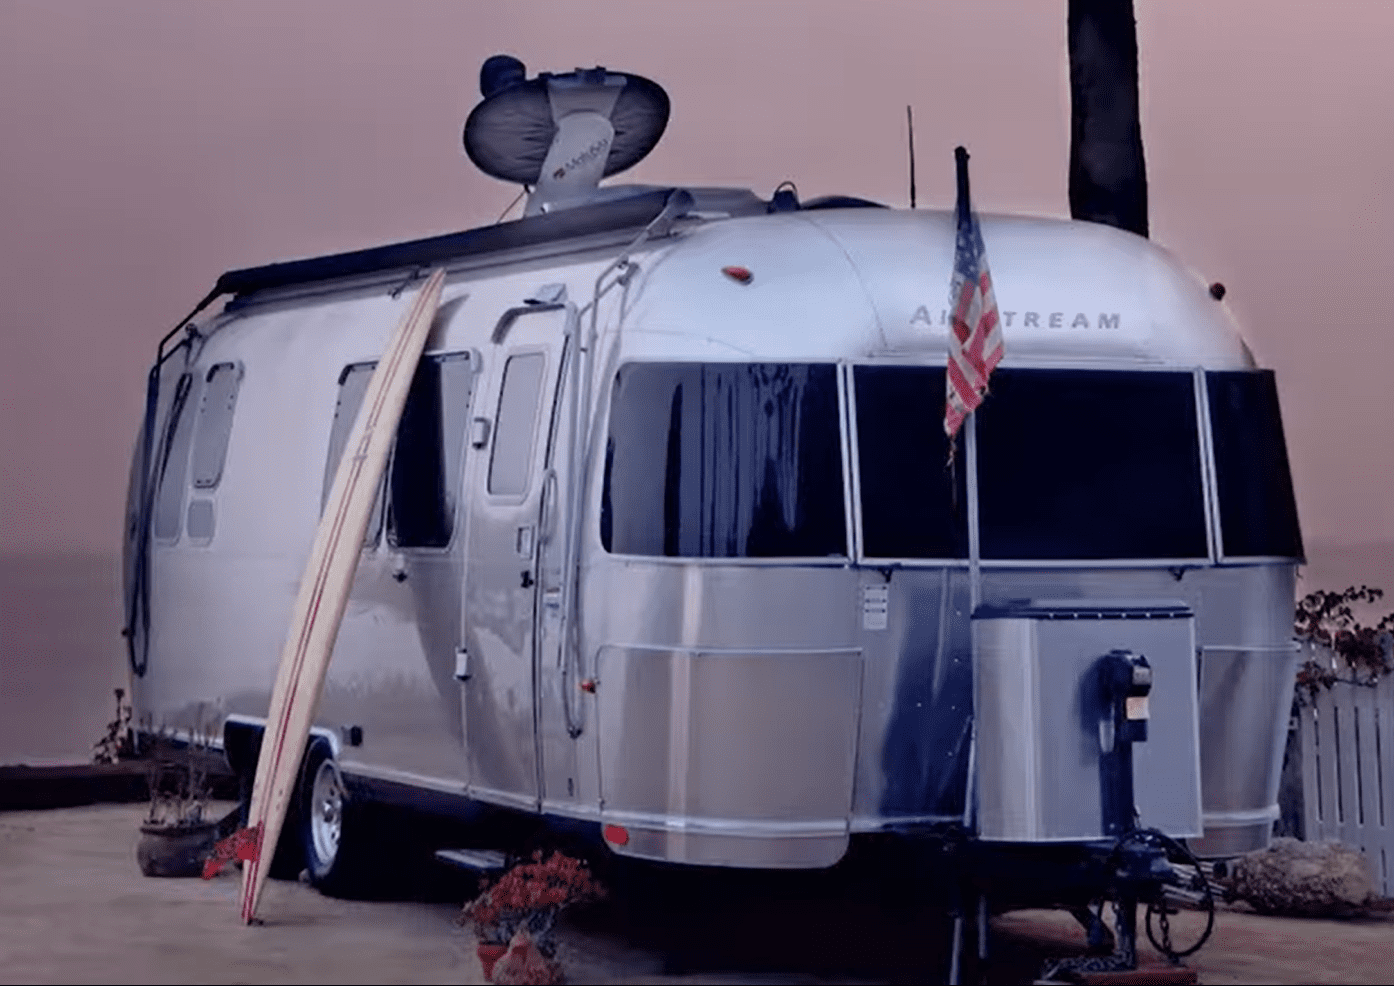 An Airstream trailer | Source: YouTube/Famous Entertainment